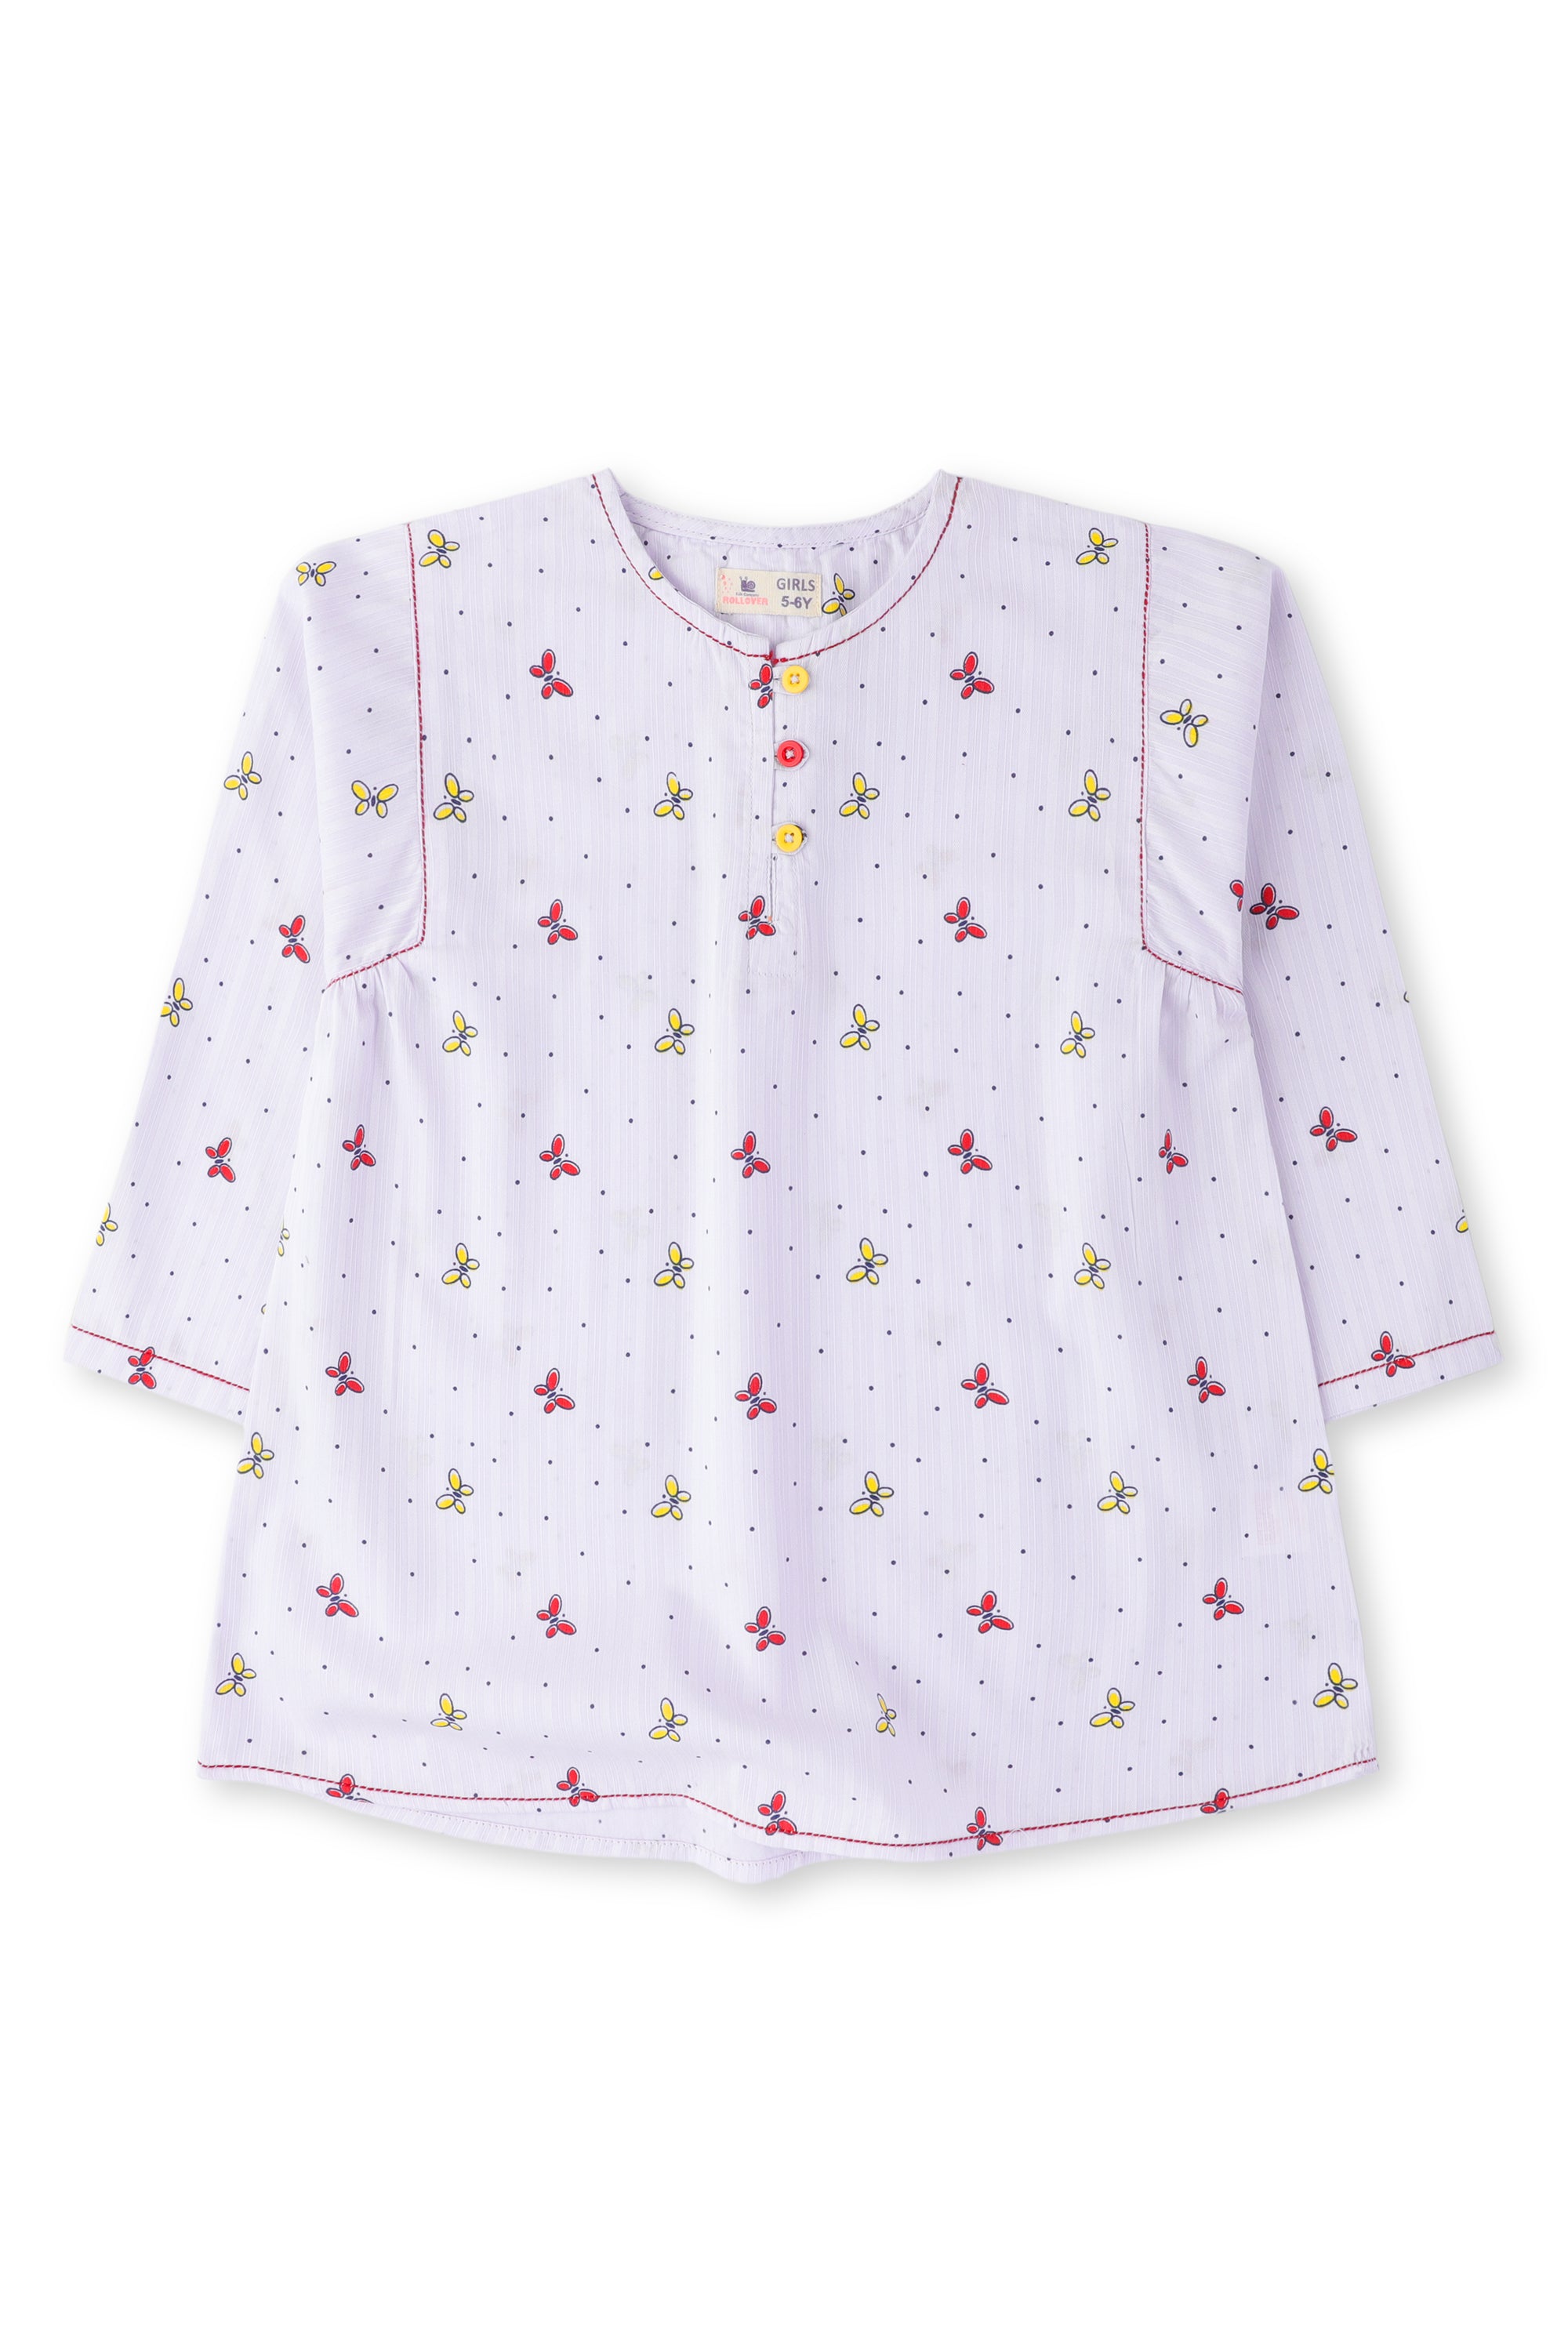 Lilac Butterfly Girls Top